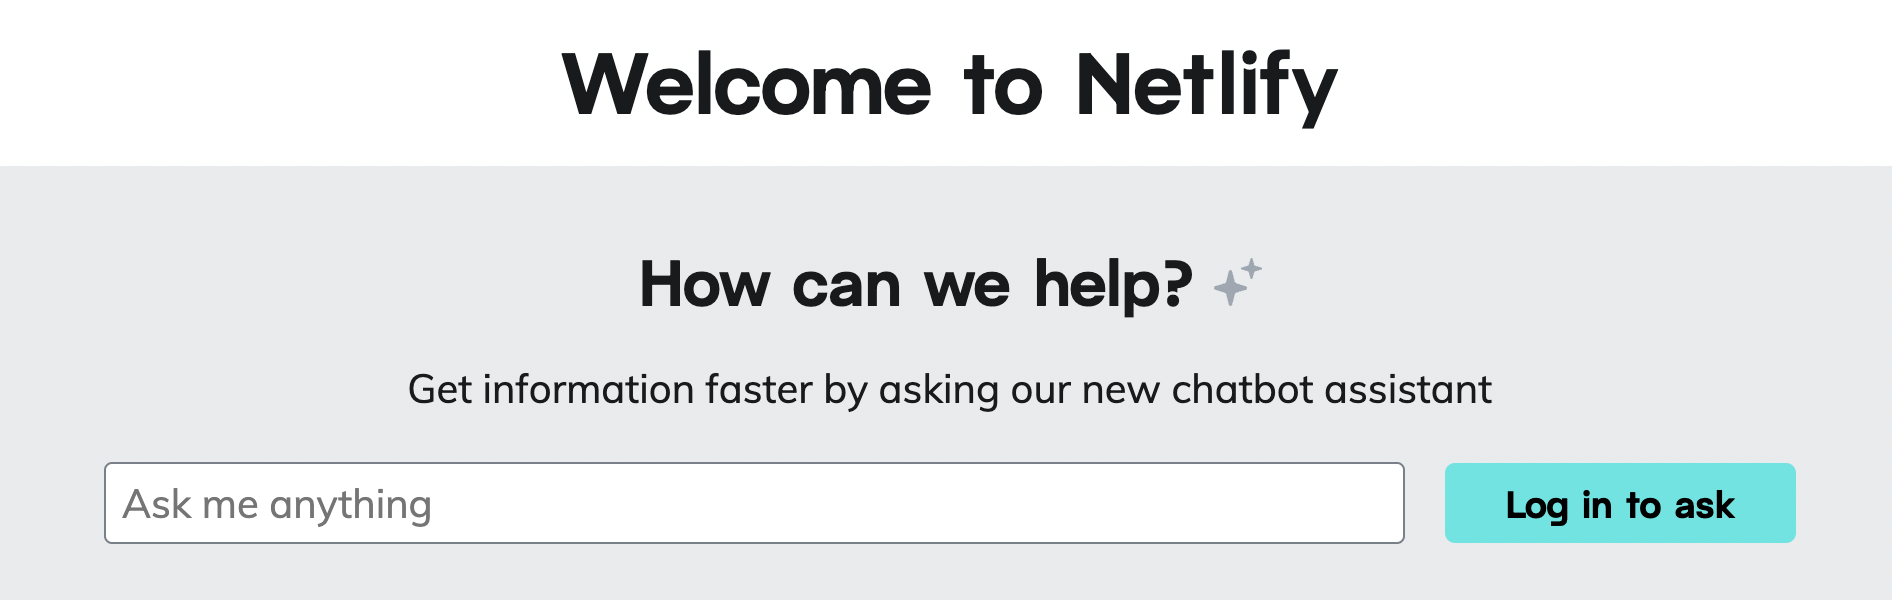 Screenshot of Netlify’s chatbot entry point on their docs homepage, asking “How can we help?” and Get information faster by asking our new chatbot assistant, with a search bar and “Log in to ask” button.